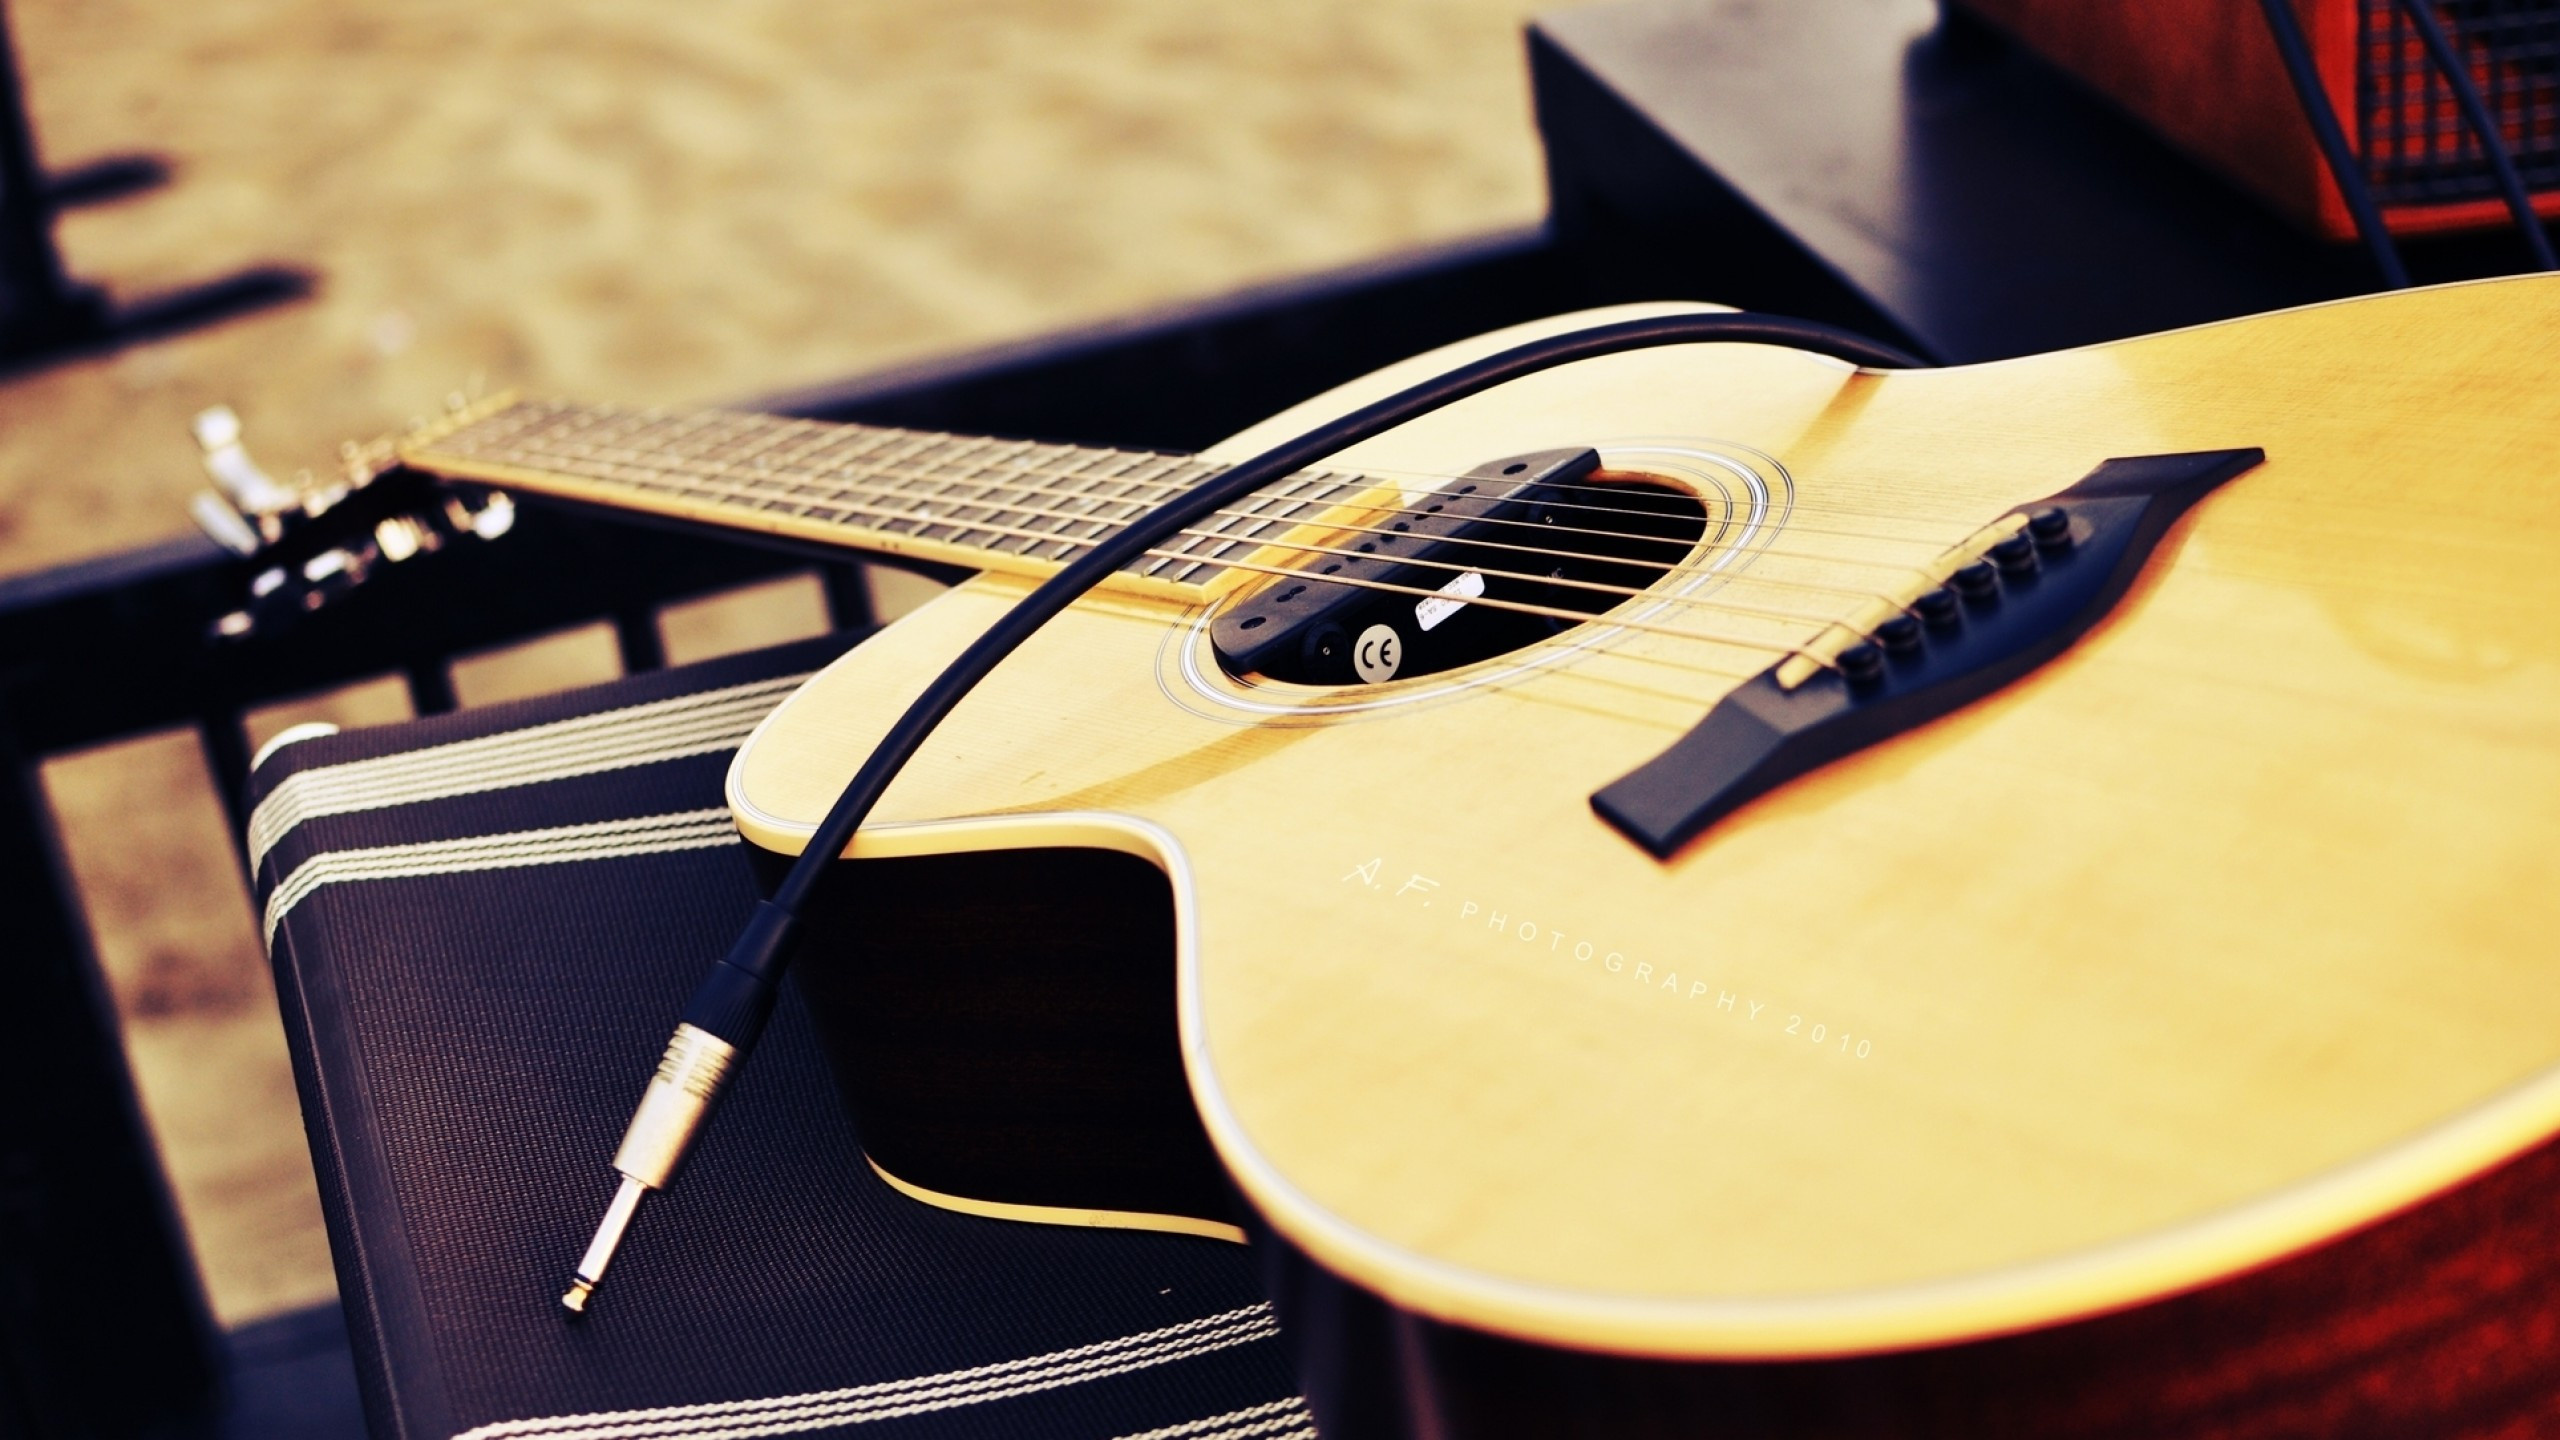 Musical Instruments: Acoustic guitar, The string family of instruments, Plucking a string. 2560x1440 HD Wallpaper.